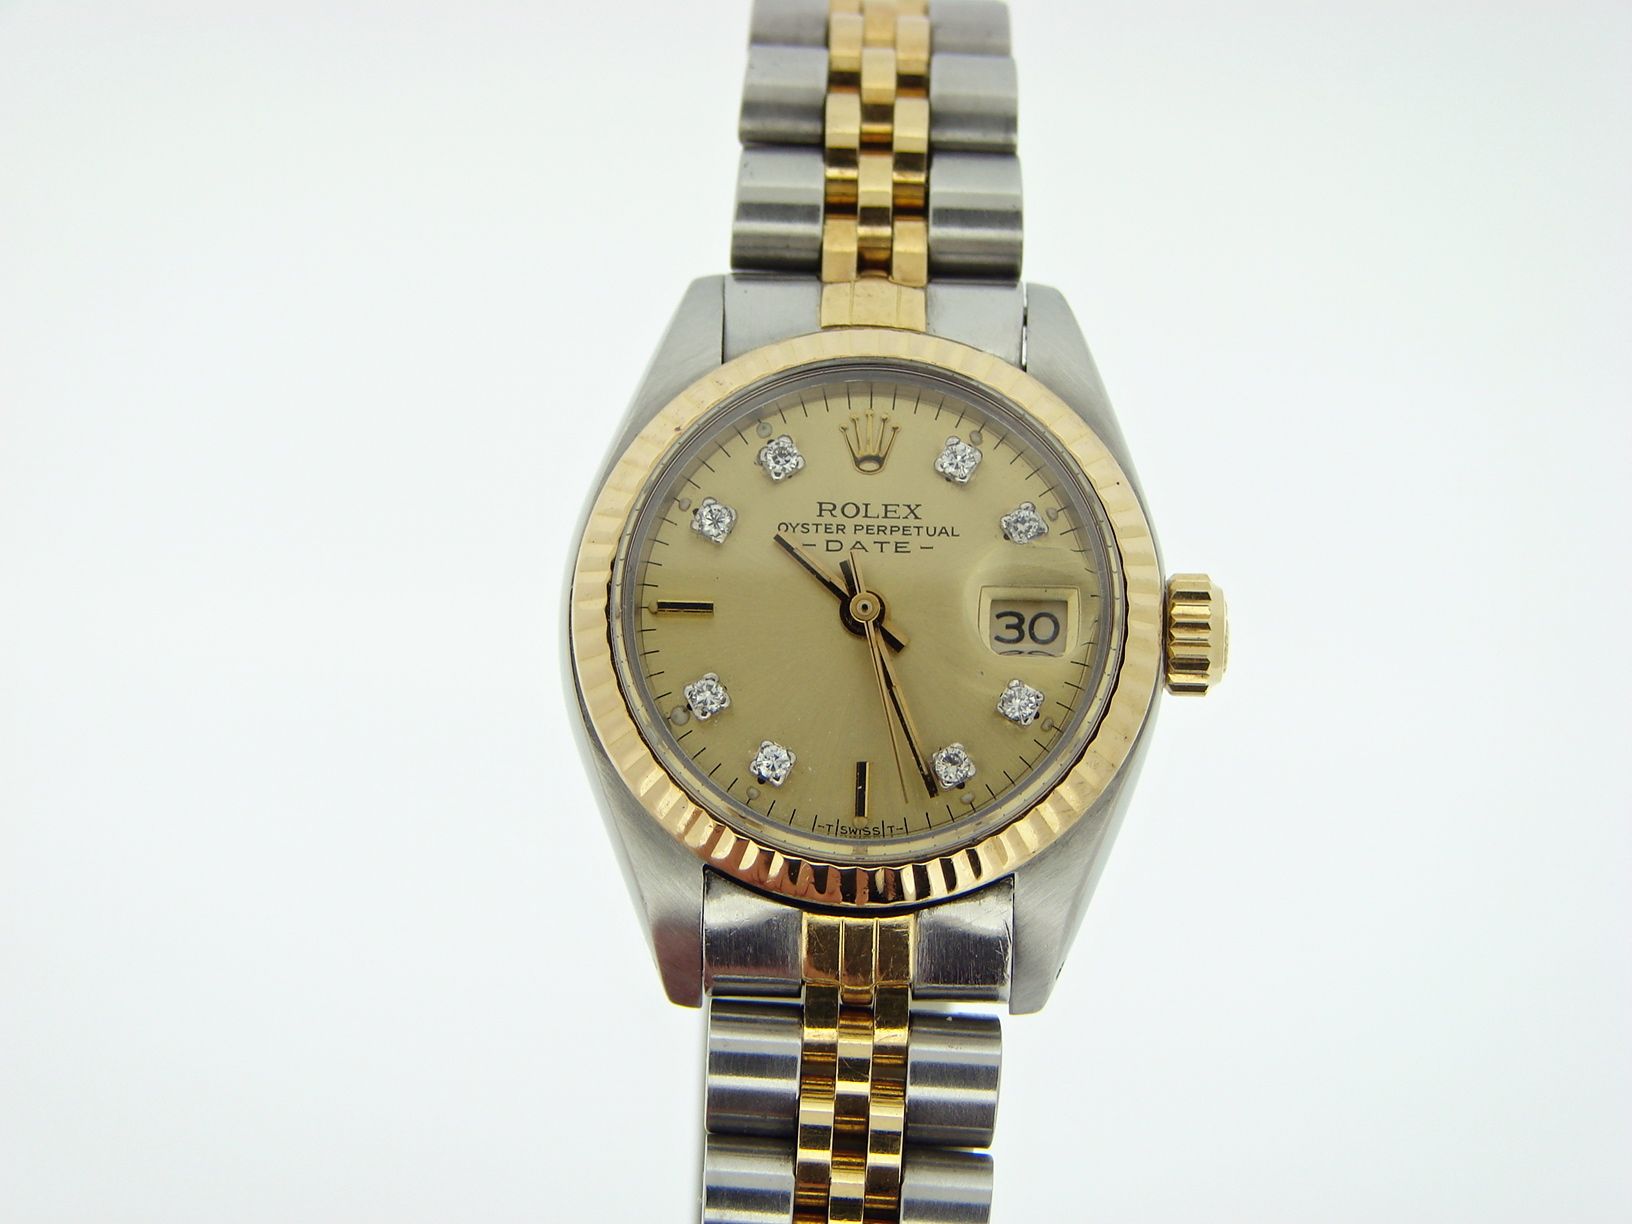 Ladies Rolex 2Tone 18K Yellow Gold Stainless Steel Date Watch w